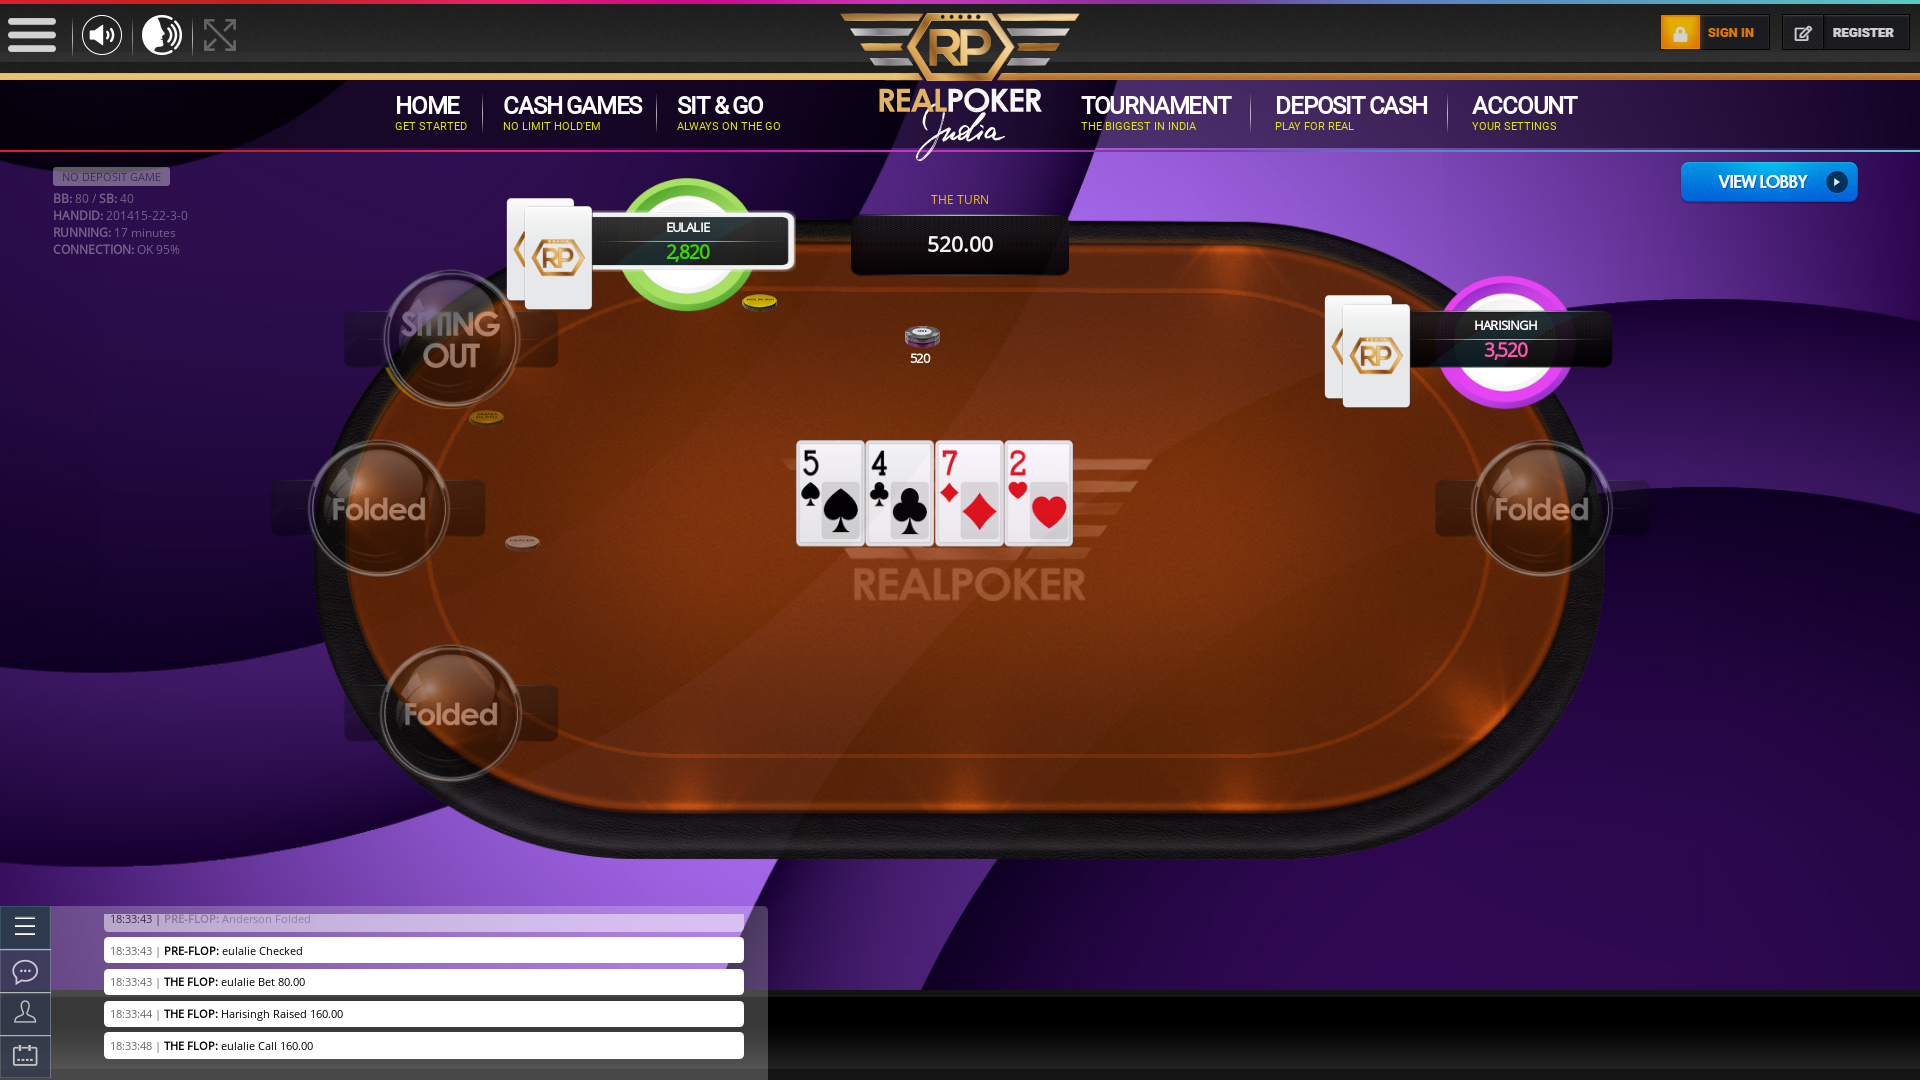 Anderson playing online poker on the Alipore, Kolkata table